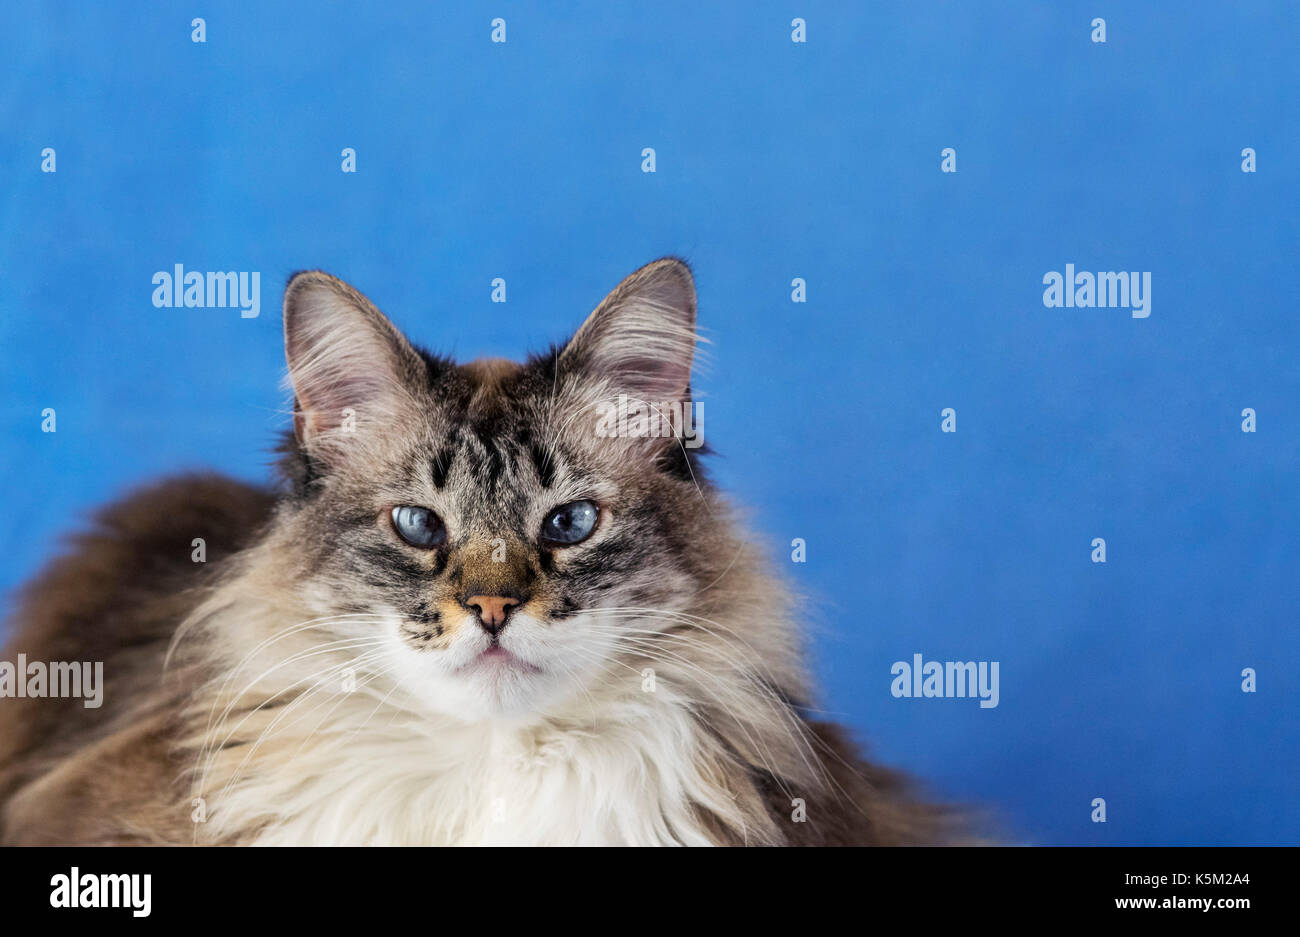 Blue eyed fluffy white and grey cat with long fur hairs, looking directly into camera, yellow nose and pointed ears, on a blue background Stock Photo